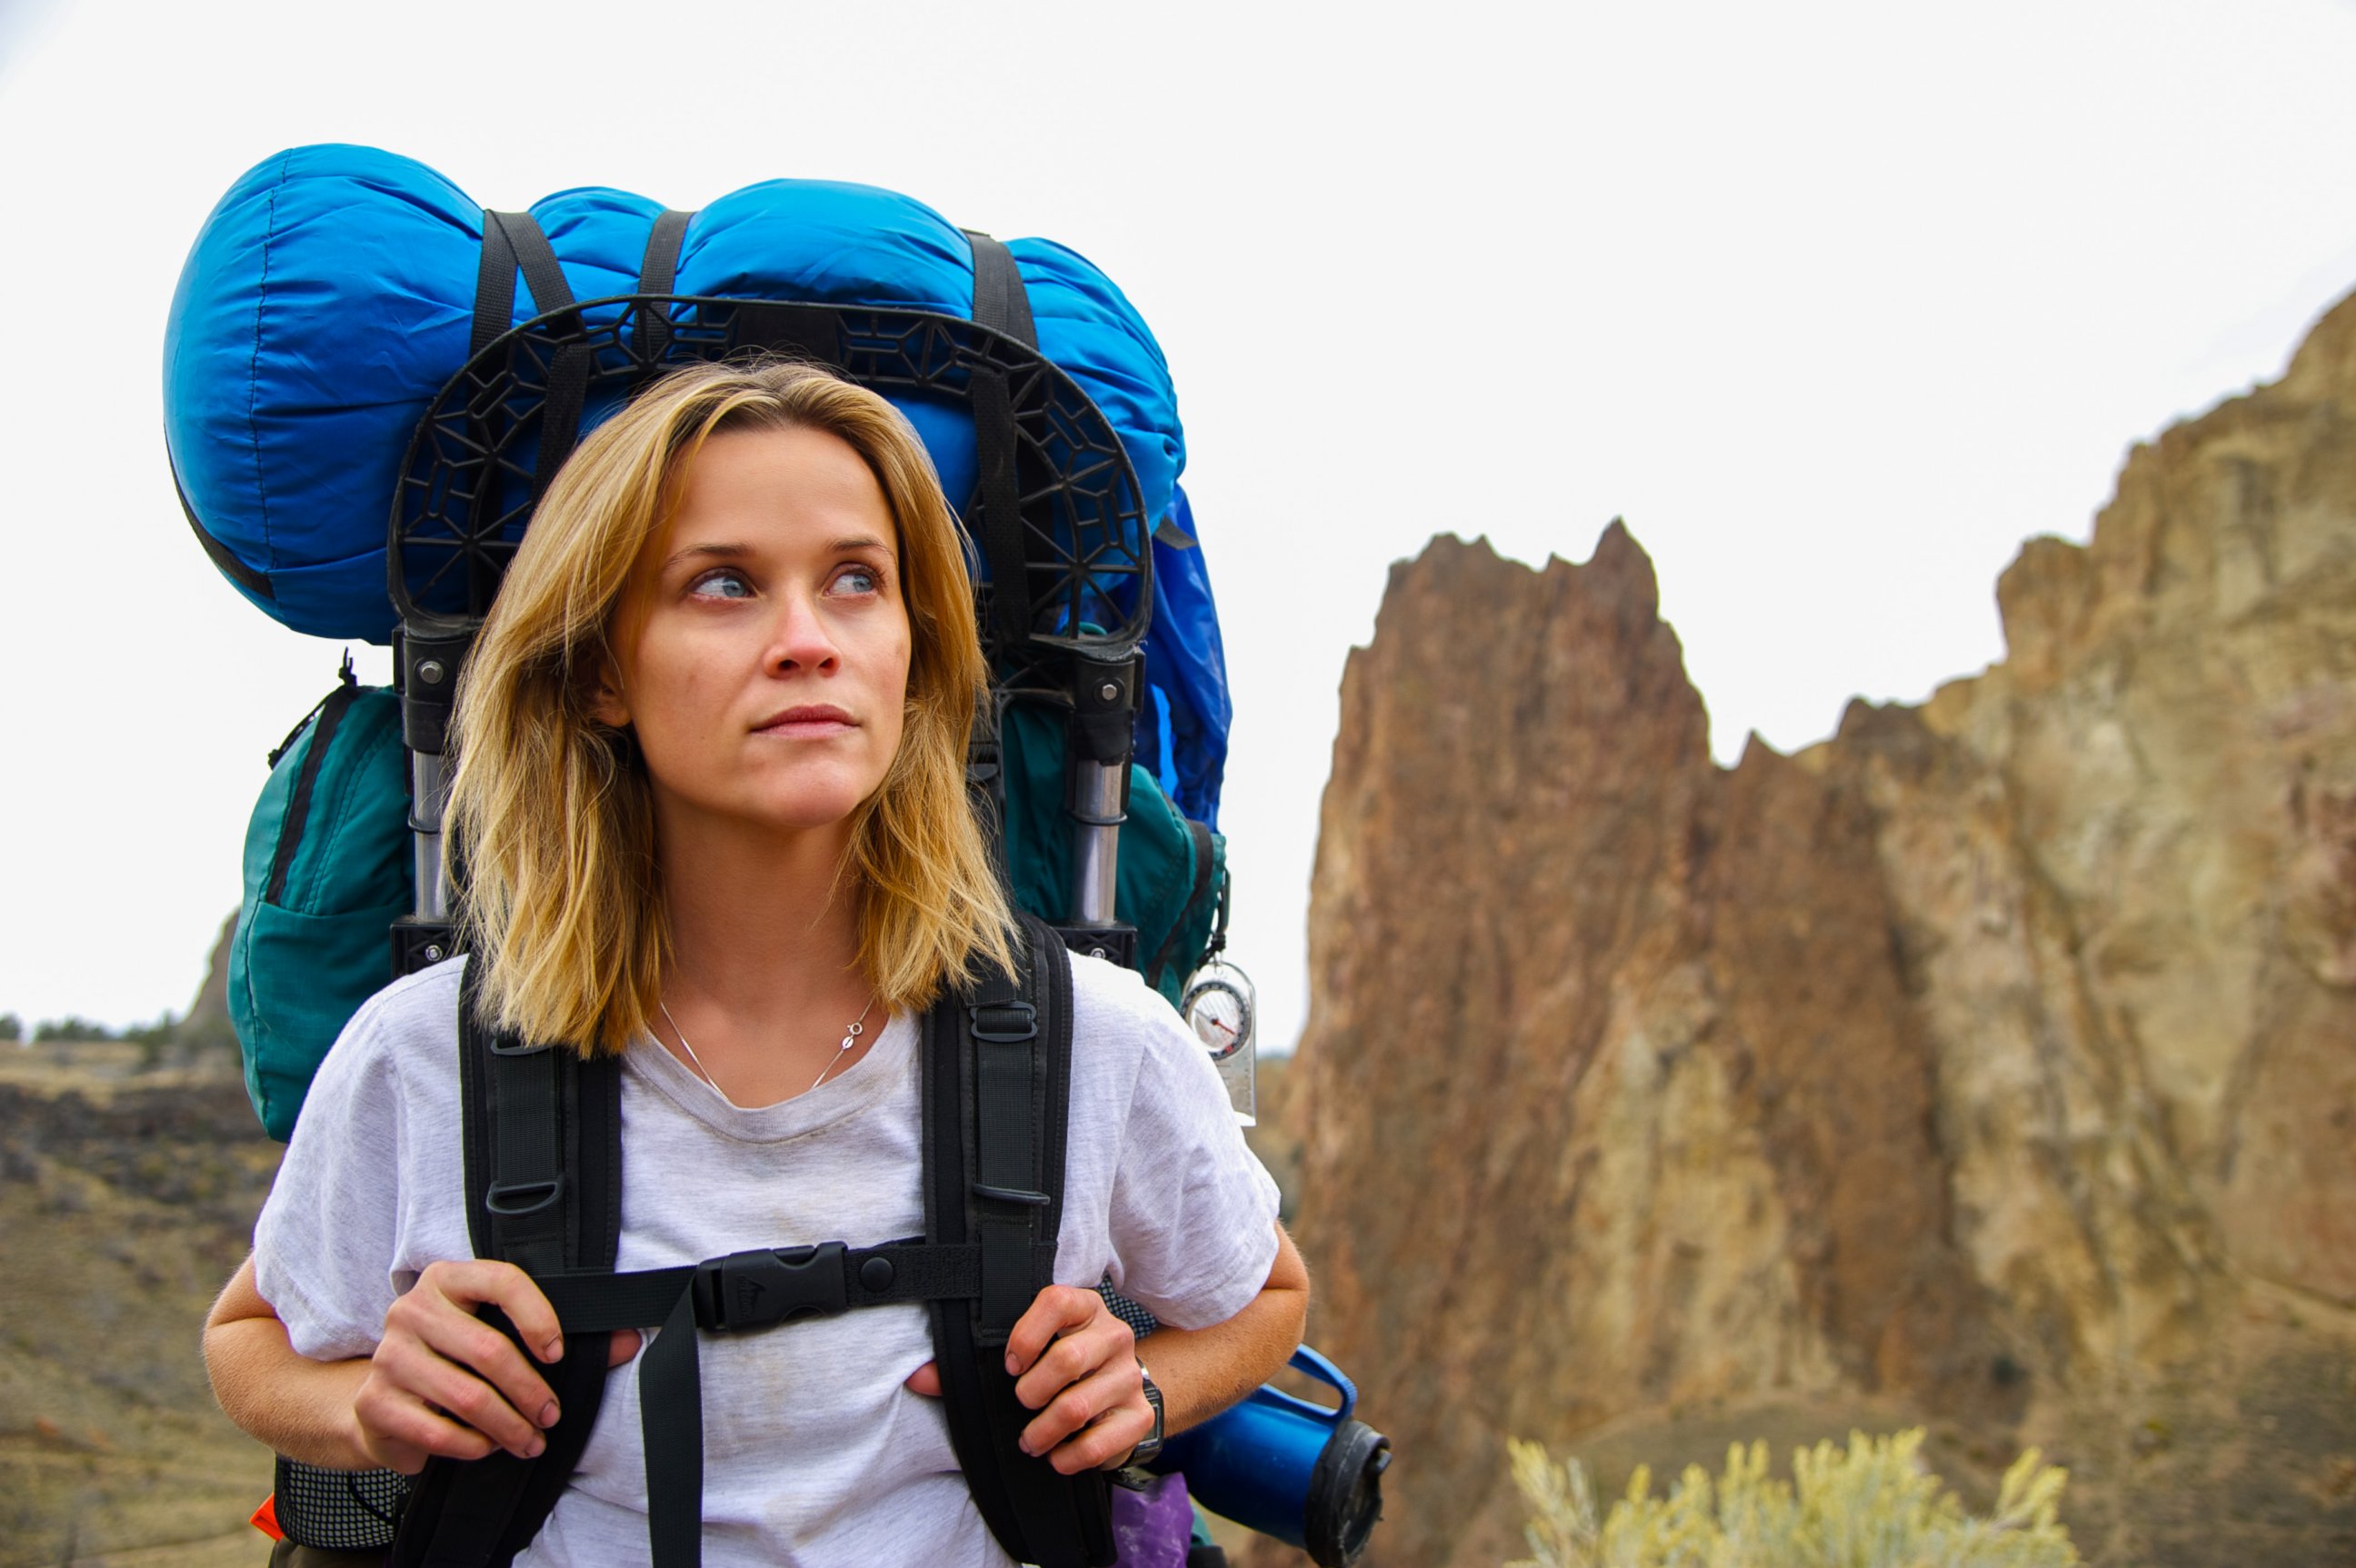 PHOTO: Reese Witherspoon in a scene from the film, "Wild."